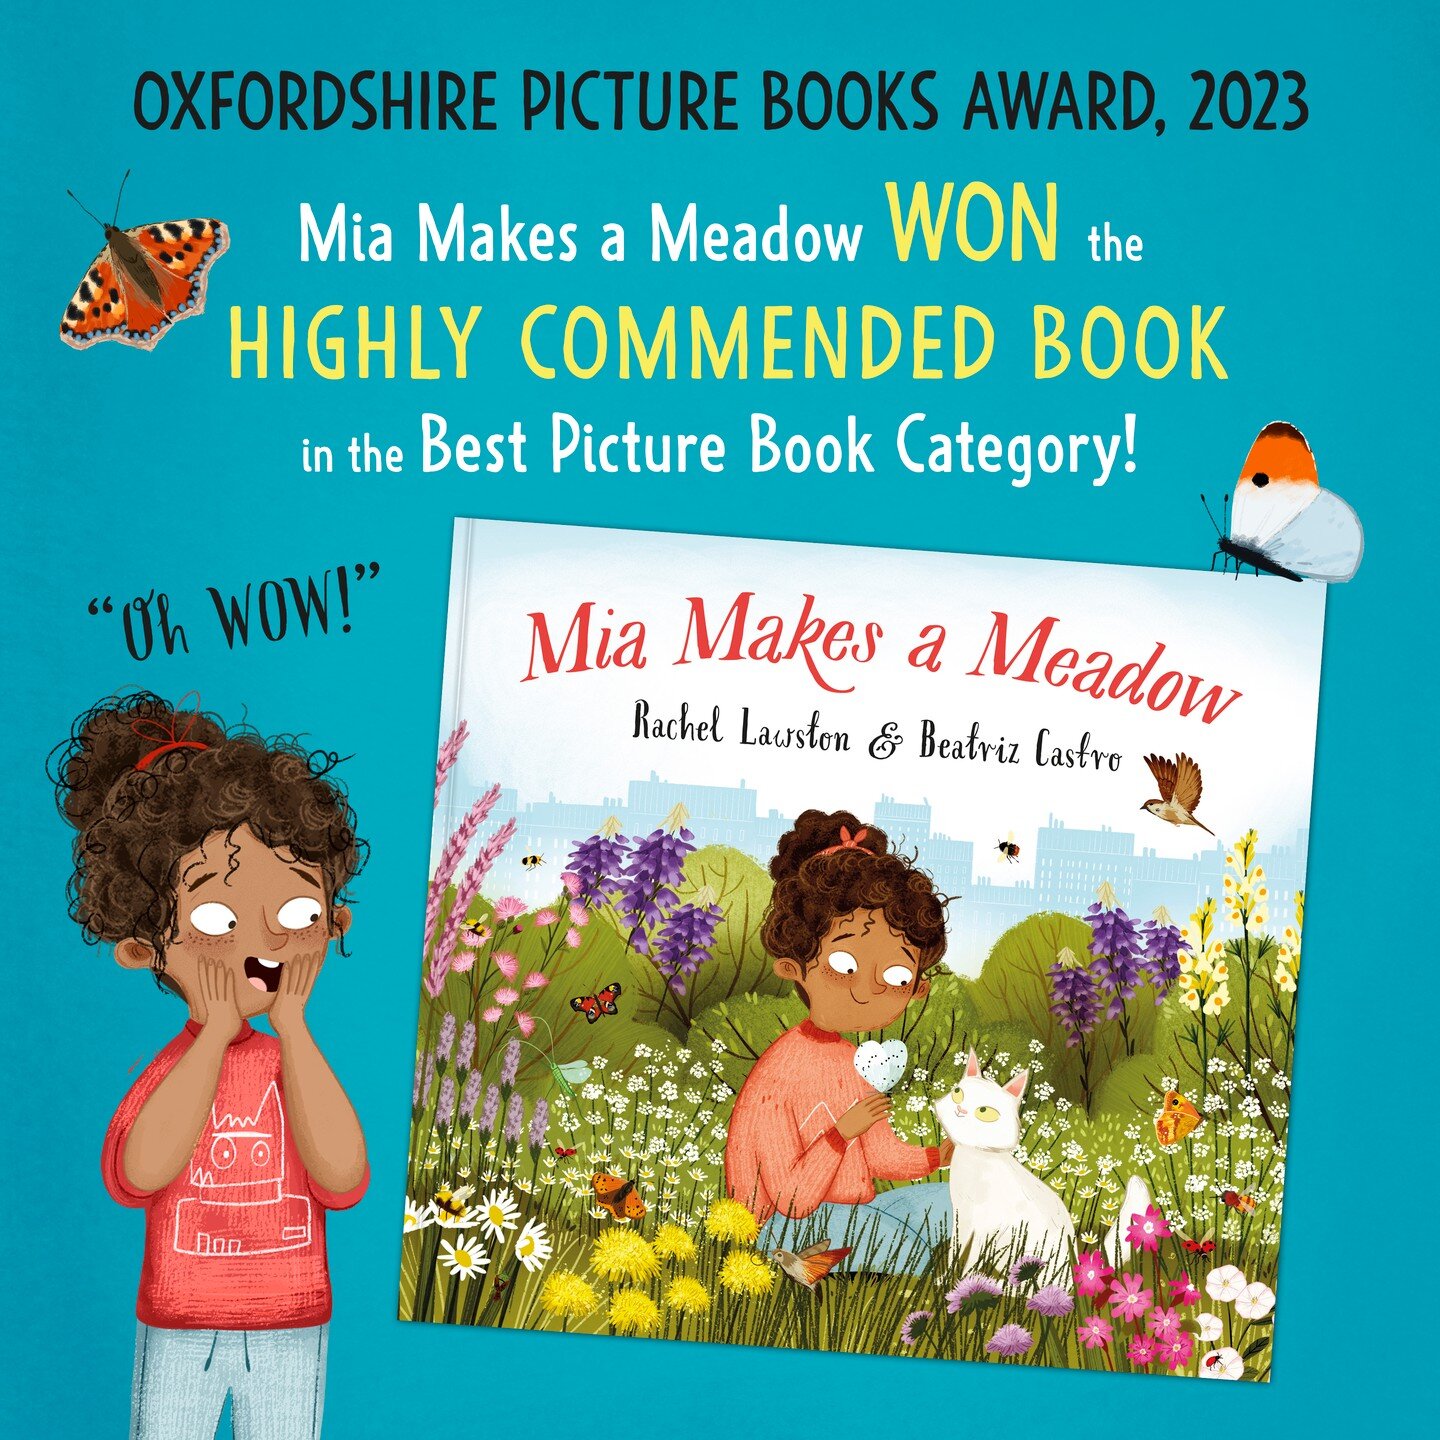 I am excited to share that Mia Makes a Meadow was recognized with a Highly Commended award in the Best Picture Book Category at the Oxfordshire Picture Books Award 2023. 

I want to thank everyone who voted, as well as my publisher @pikkubooks, edito